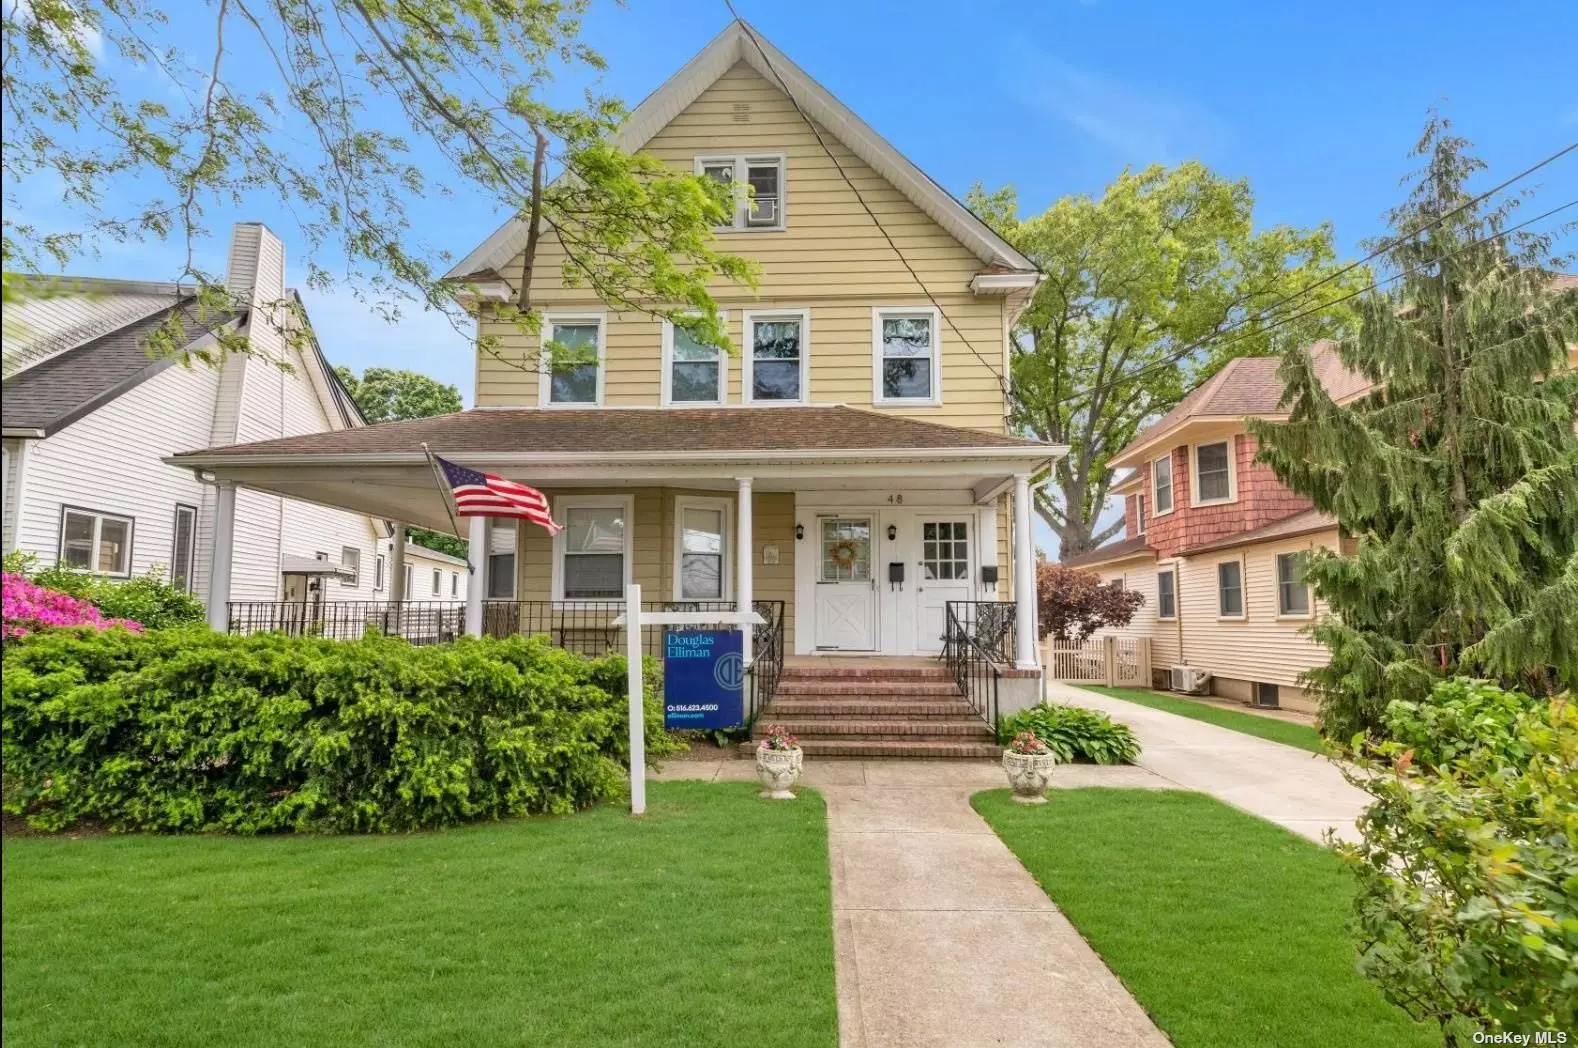 Location, Location, Location! Inviting wrap around porch welcoming you to 2 bedroom 1 full bath over 2 bedroom 1 full bath in the heart of Lynbrook. Eat in Kitchens. Full finished basement and parklike property. Do not miss out on this wonderful opportunity!